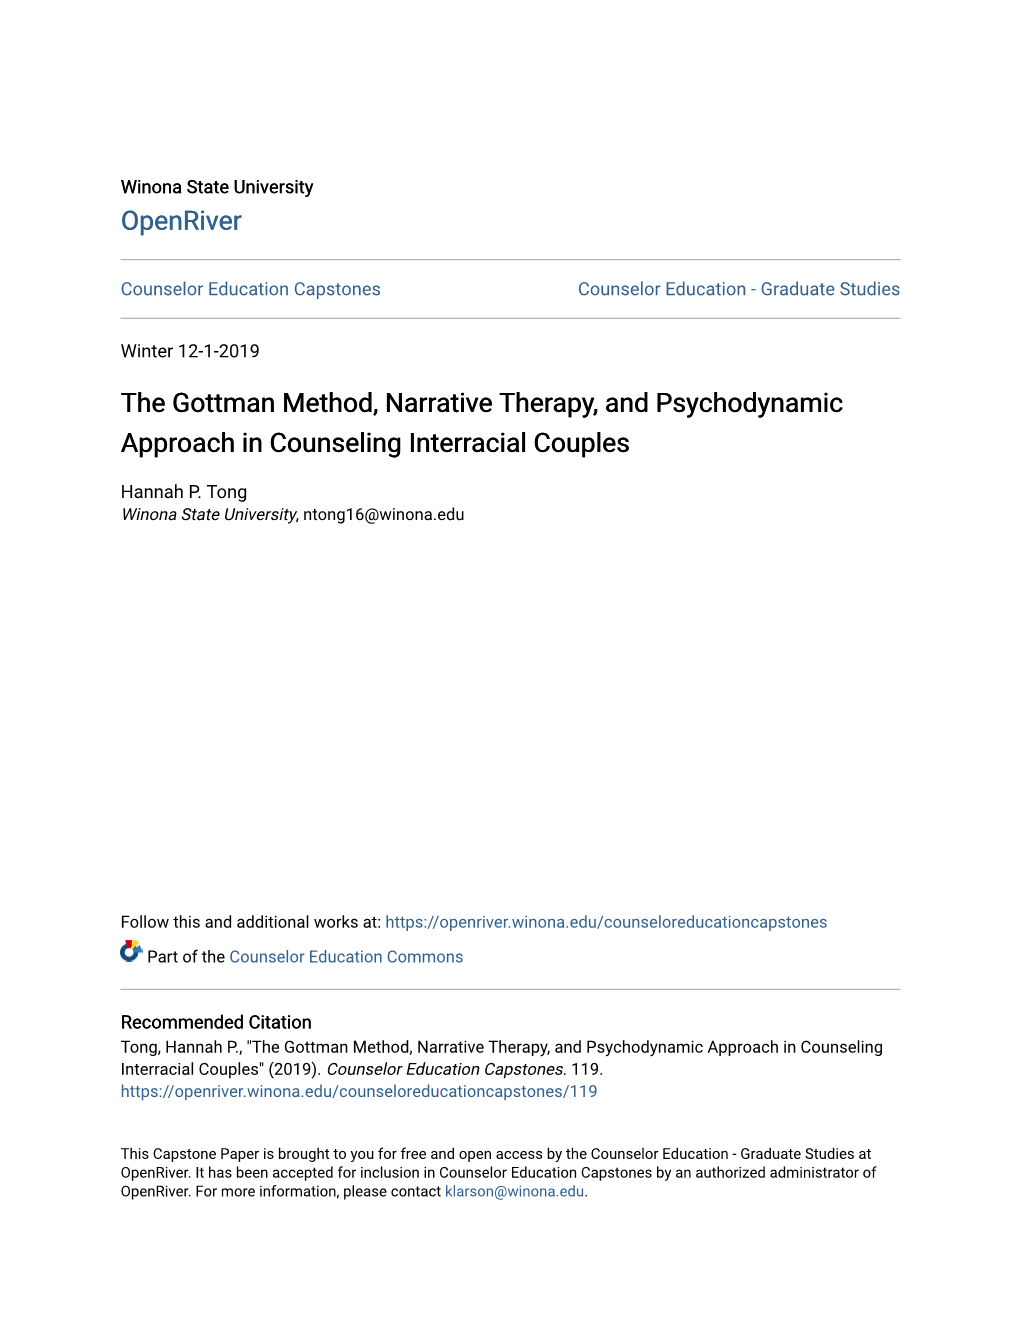 The Gottman Method, Narrative Therapy, and Psychodynamic Approach in Counseling Interracial Couples